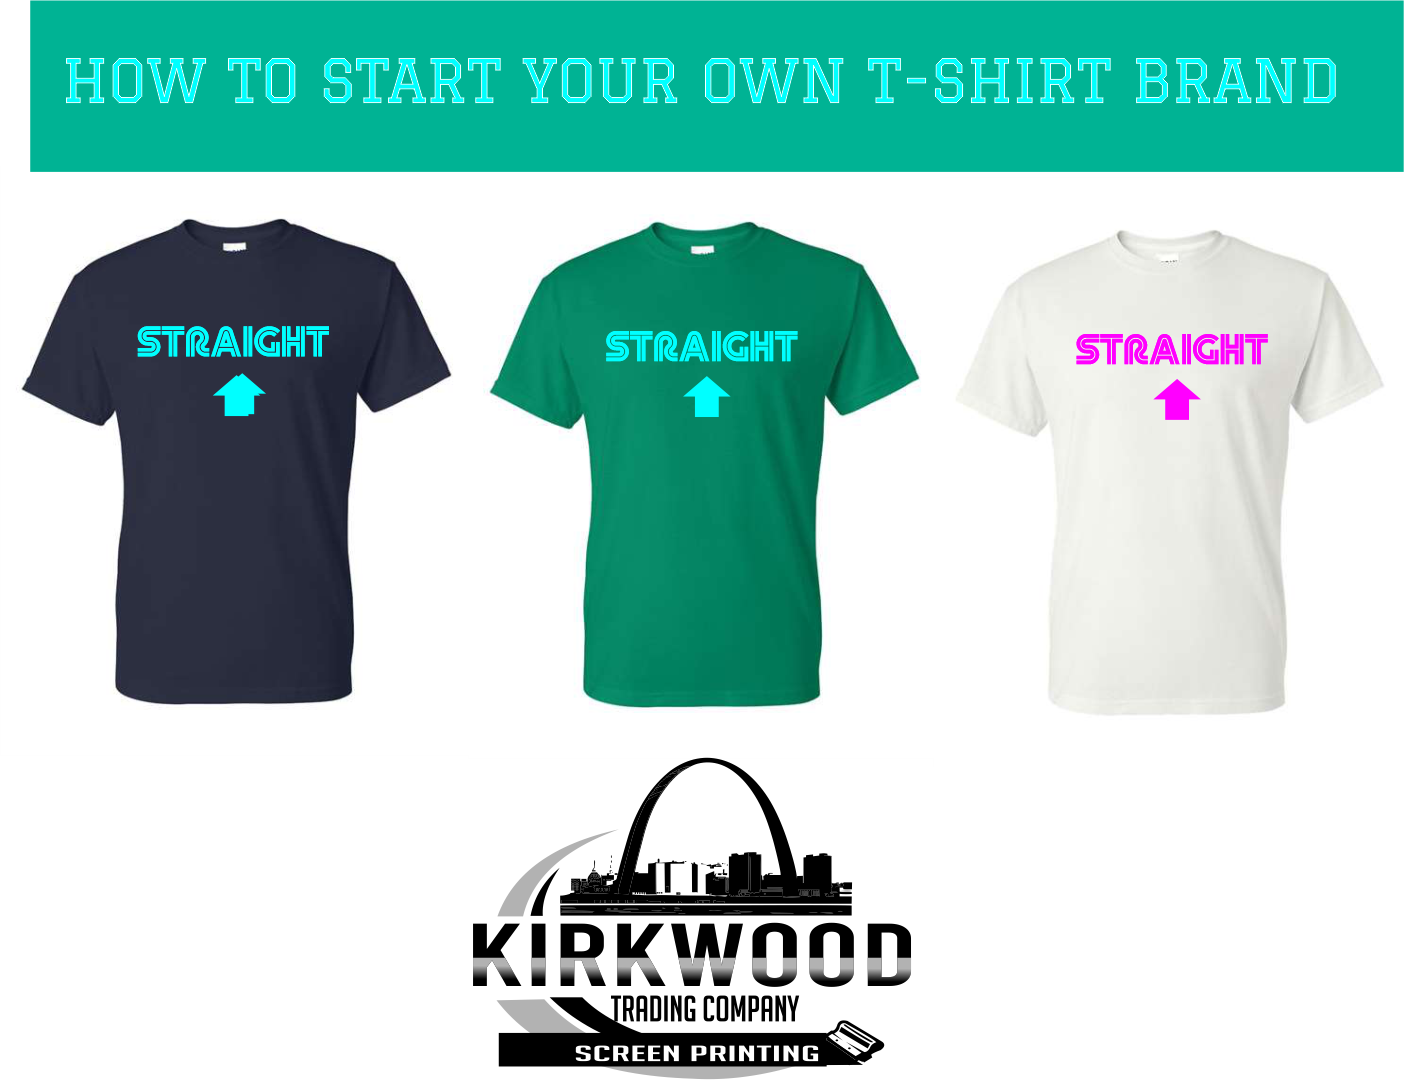 How to start your own t-shirt brand